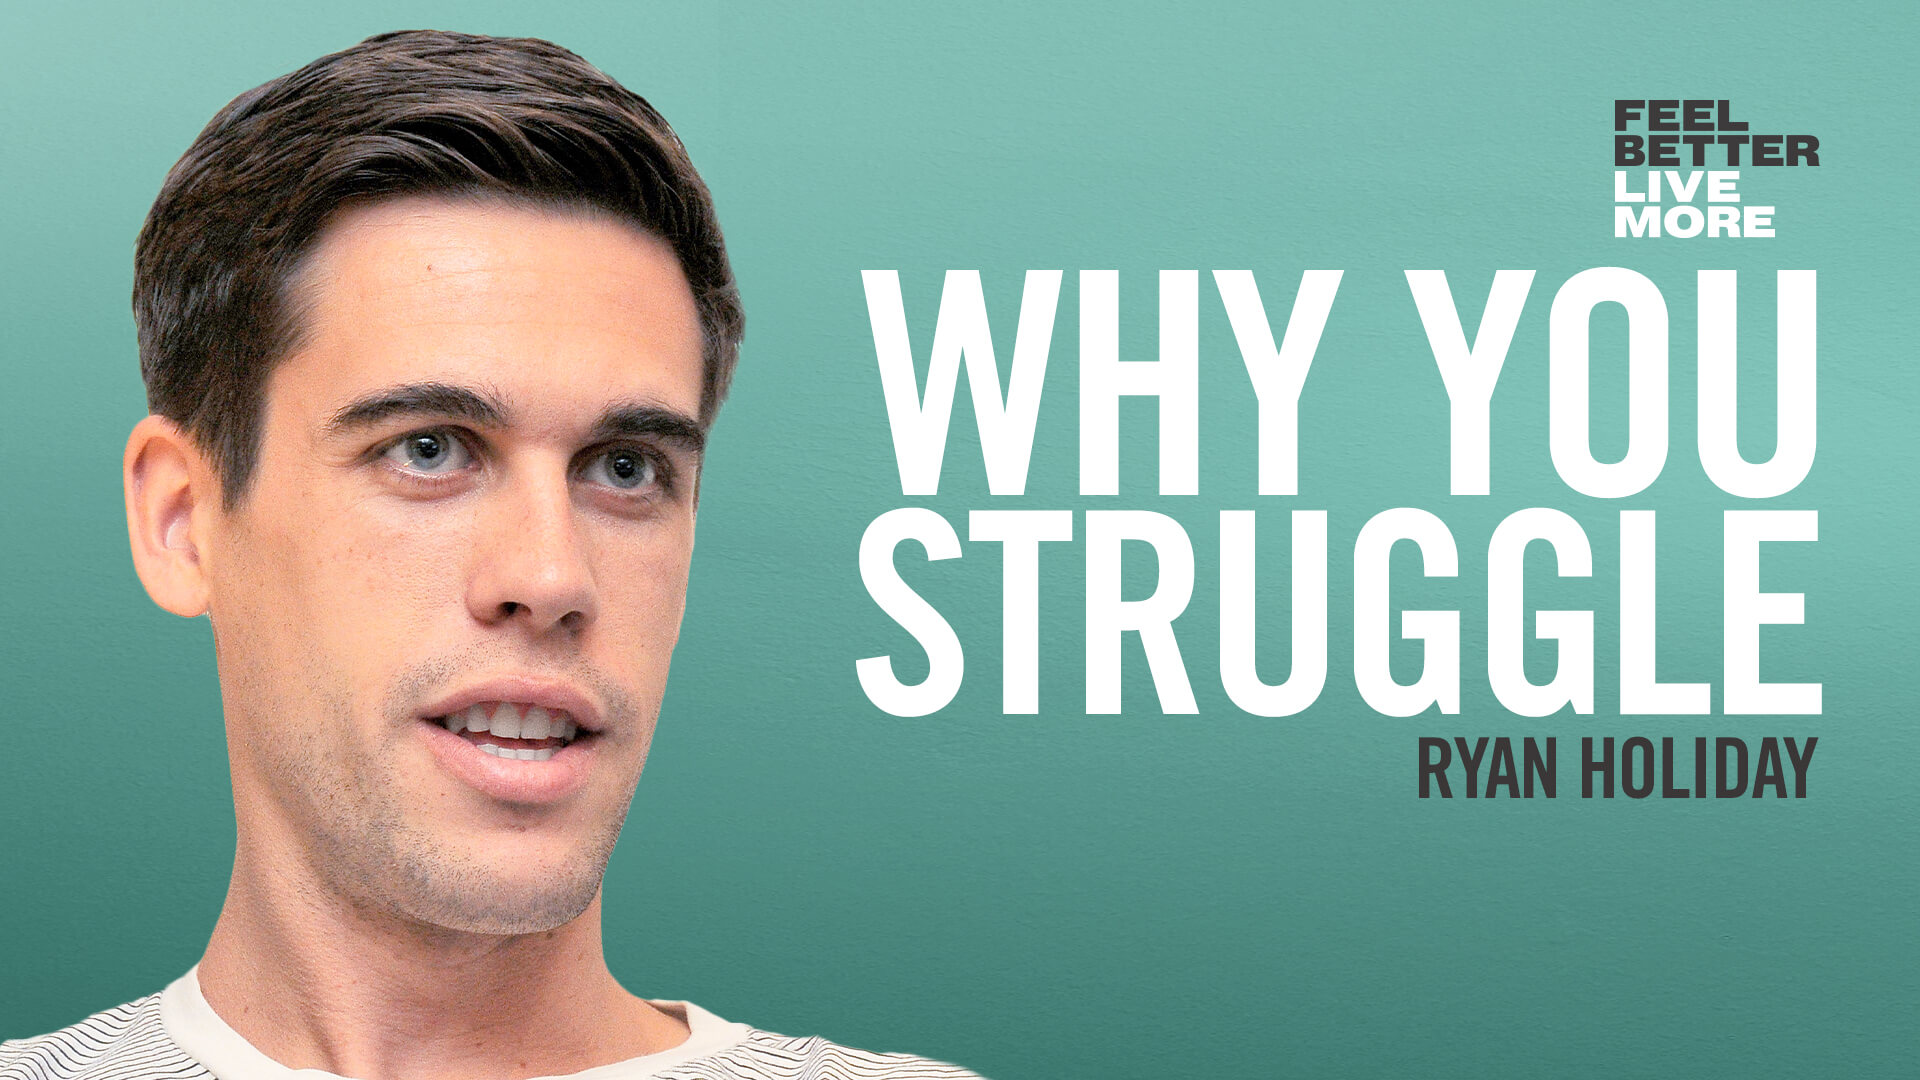 How To Change Your Mindset and Transform Your Life with Ryan